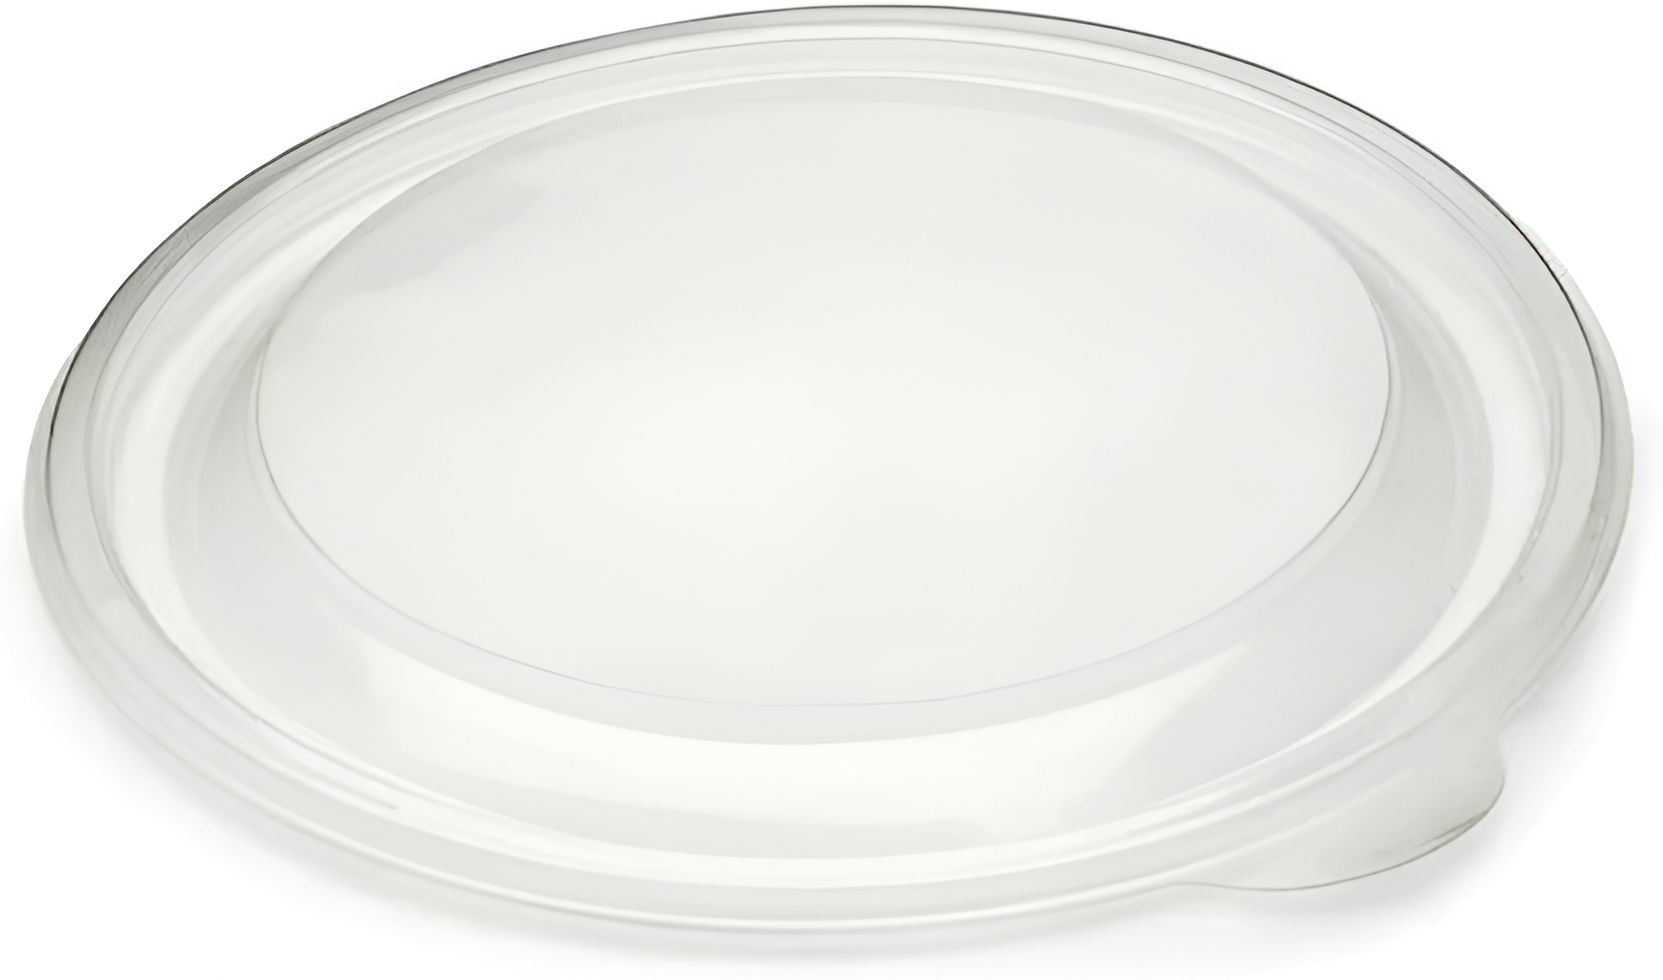 Sabert - Clear Dome Lid for 8, 12, 16 Oz Small Round Containers, 500/cs - 52571B500